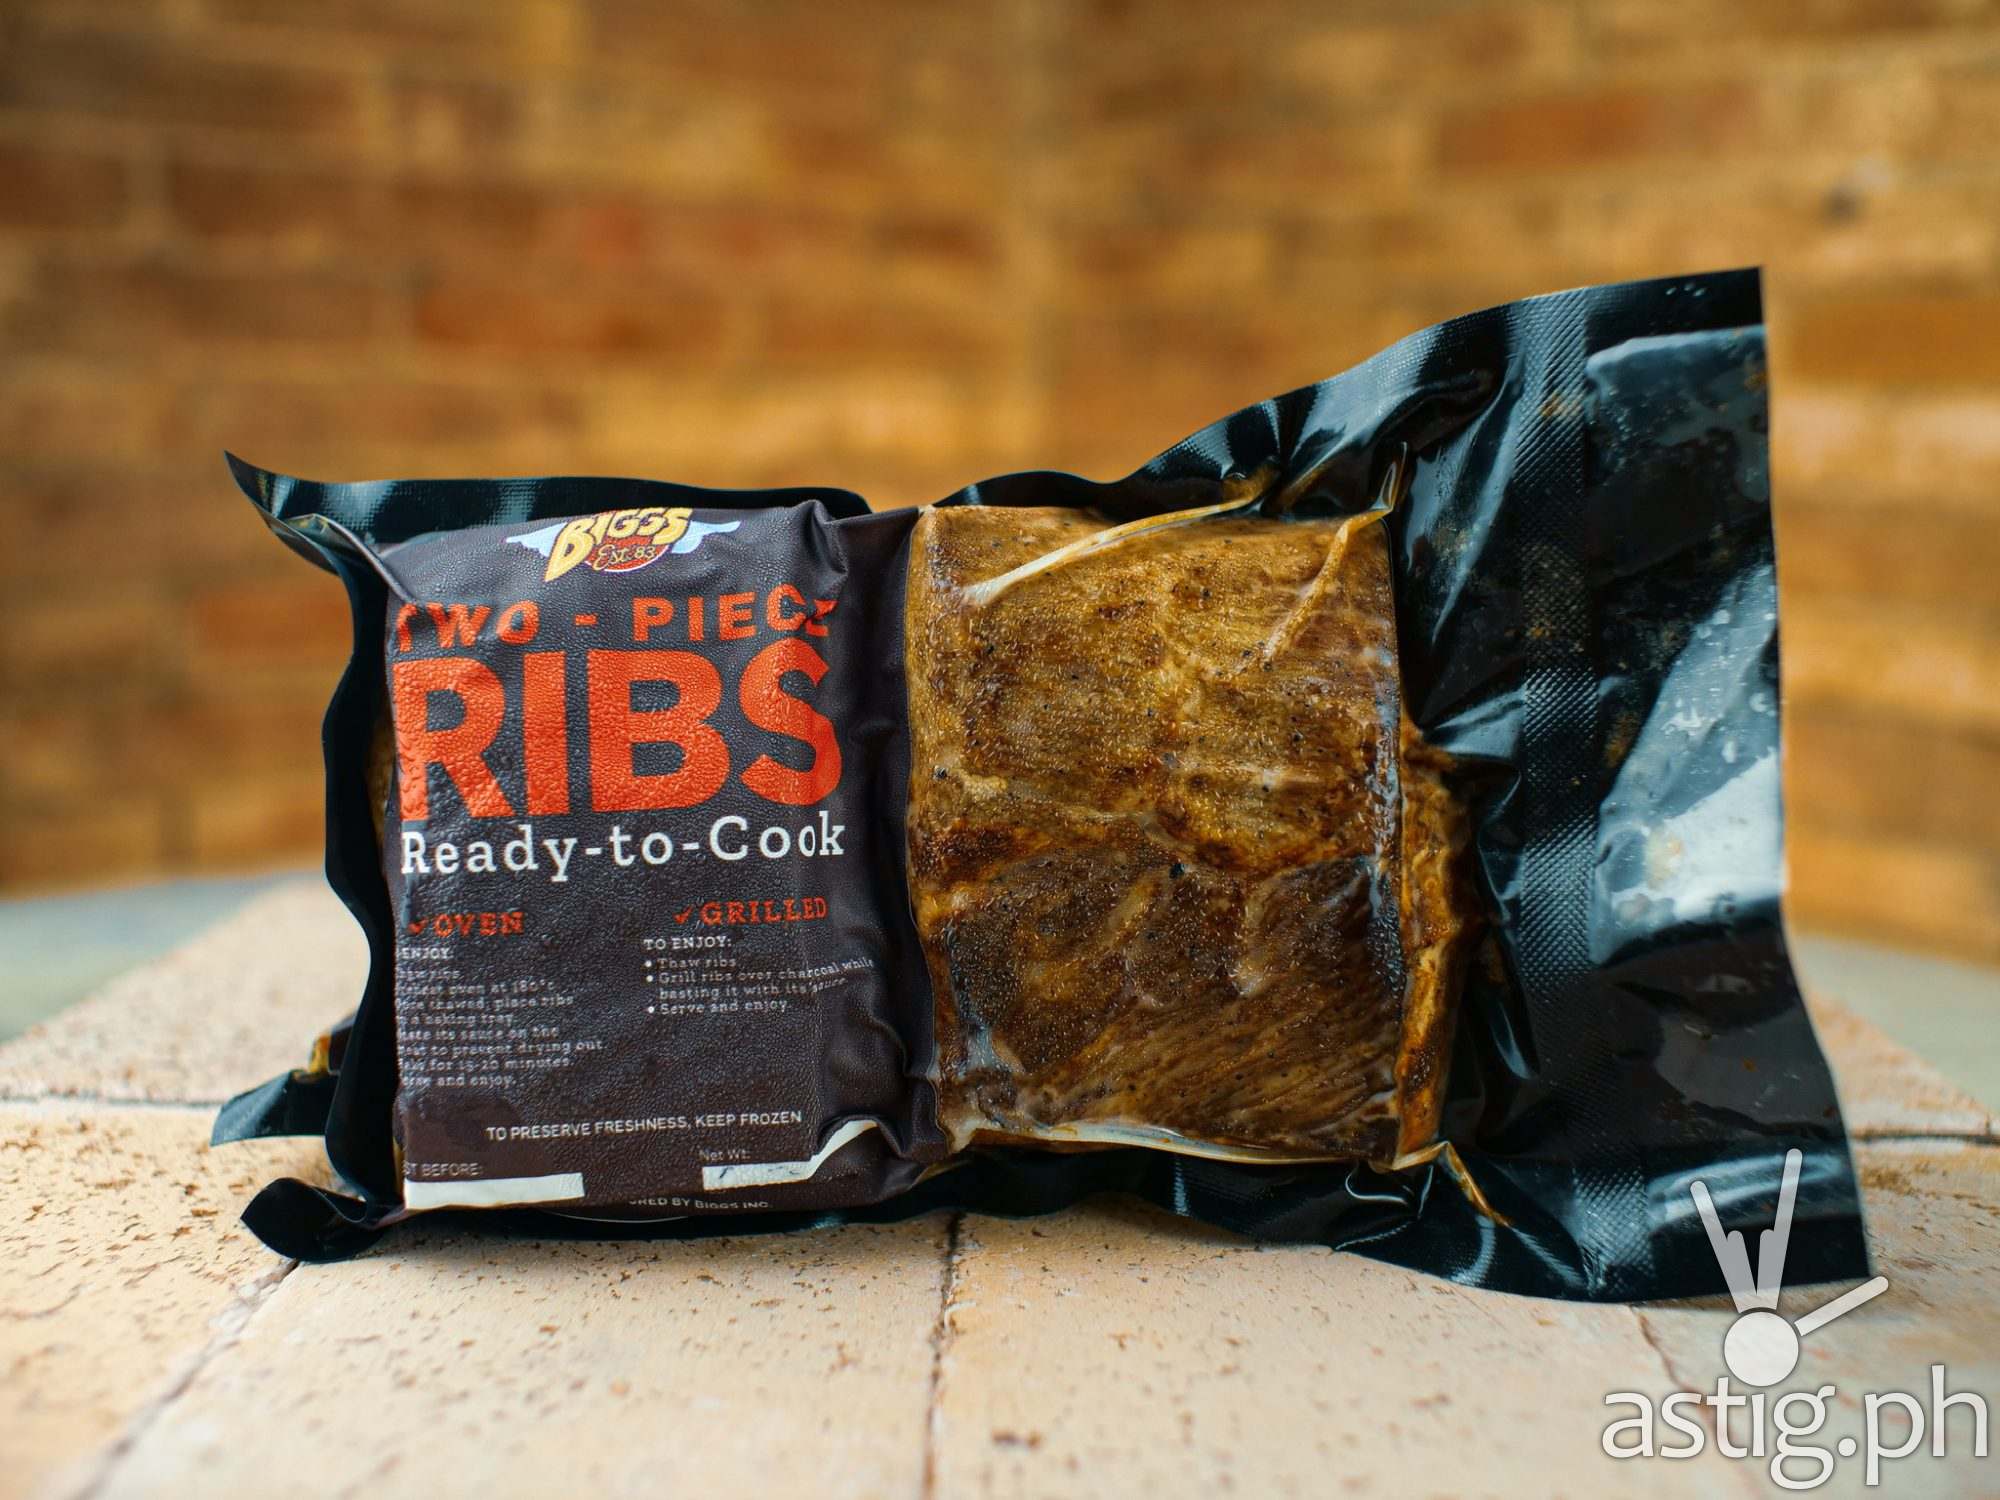 BIGGS Ready-To-Cook Ribs